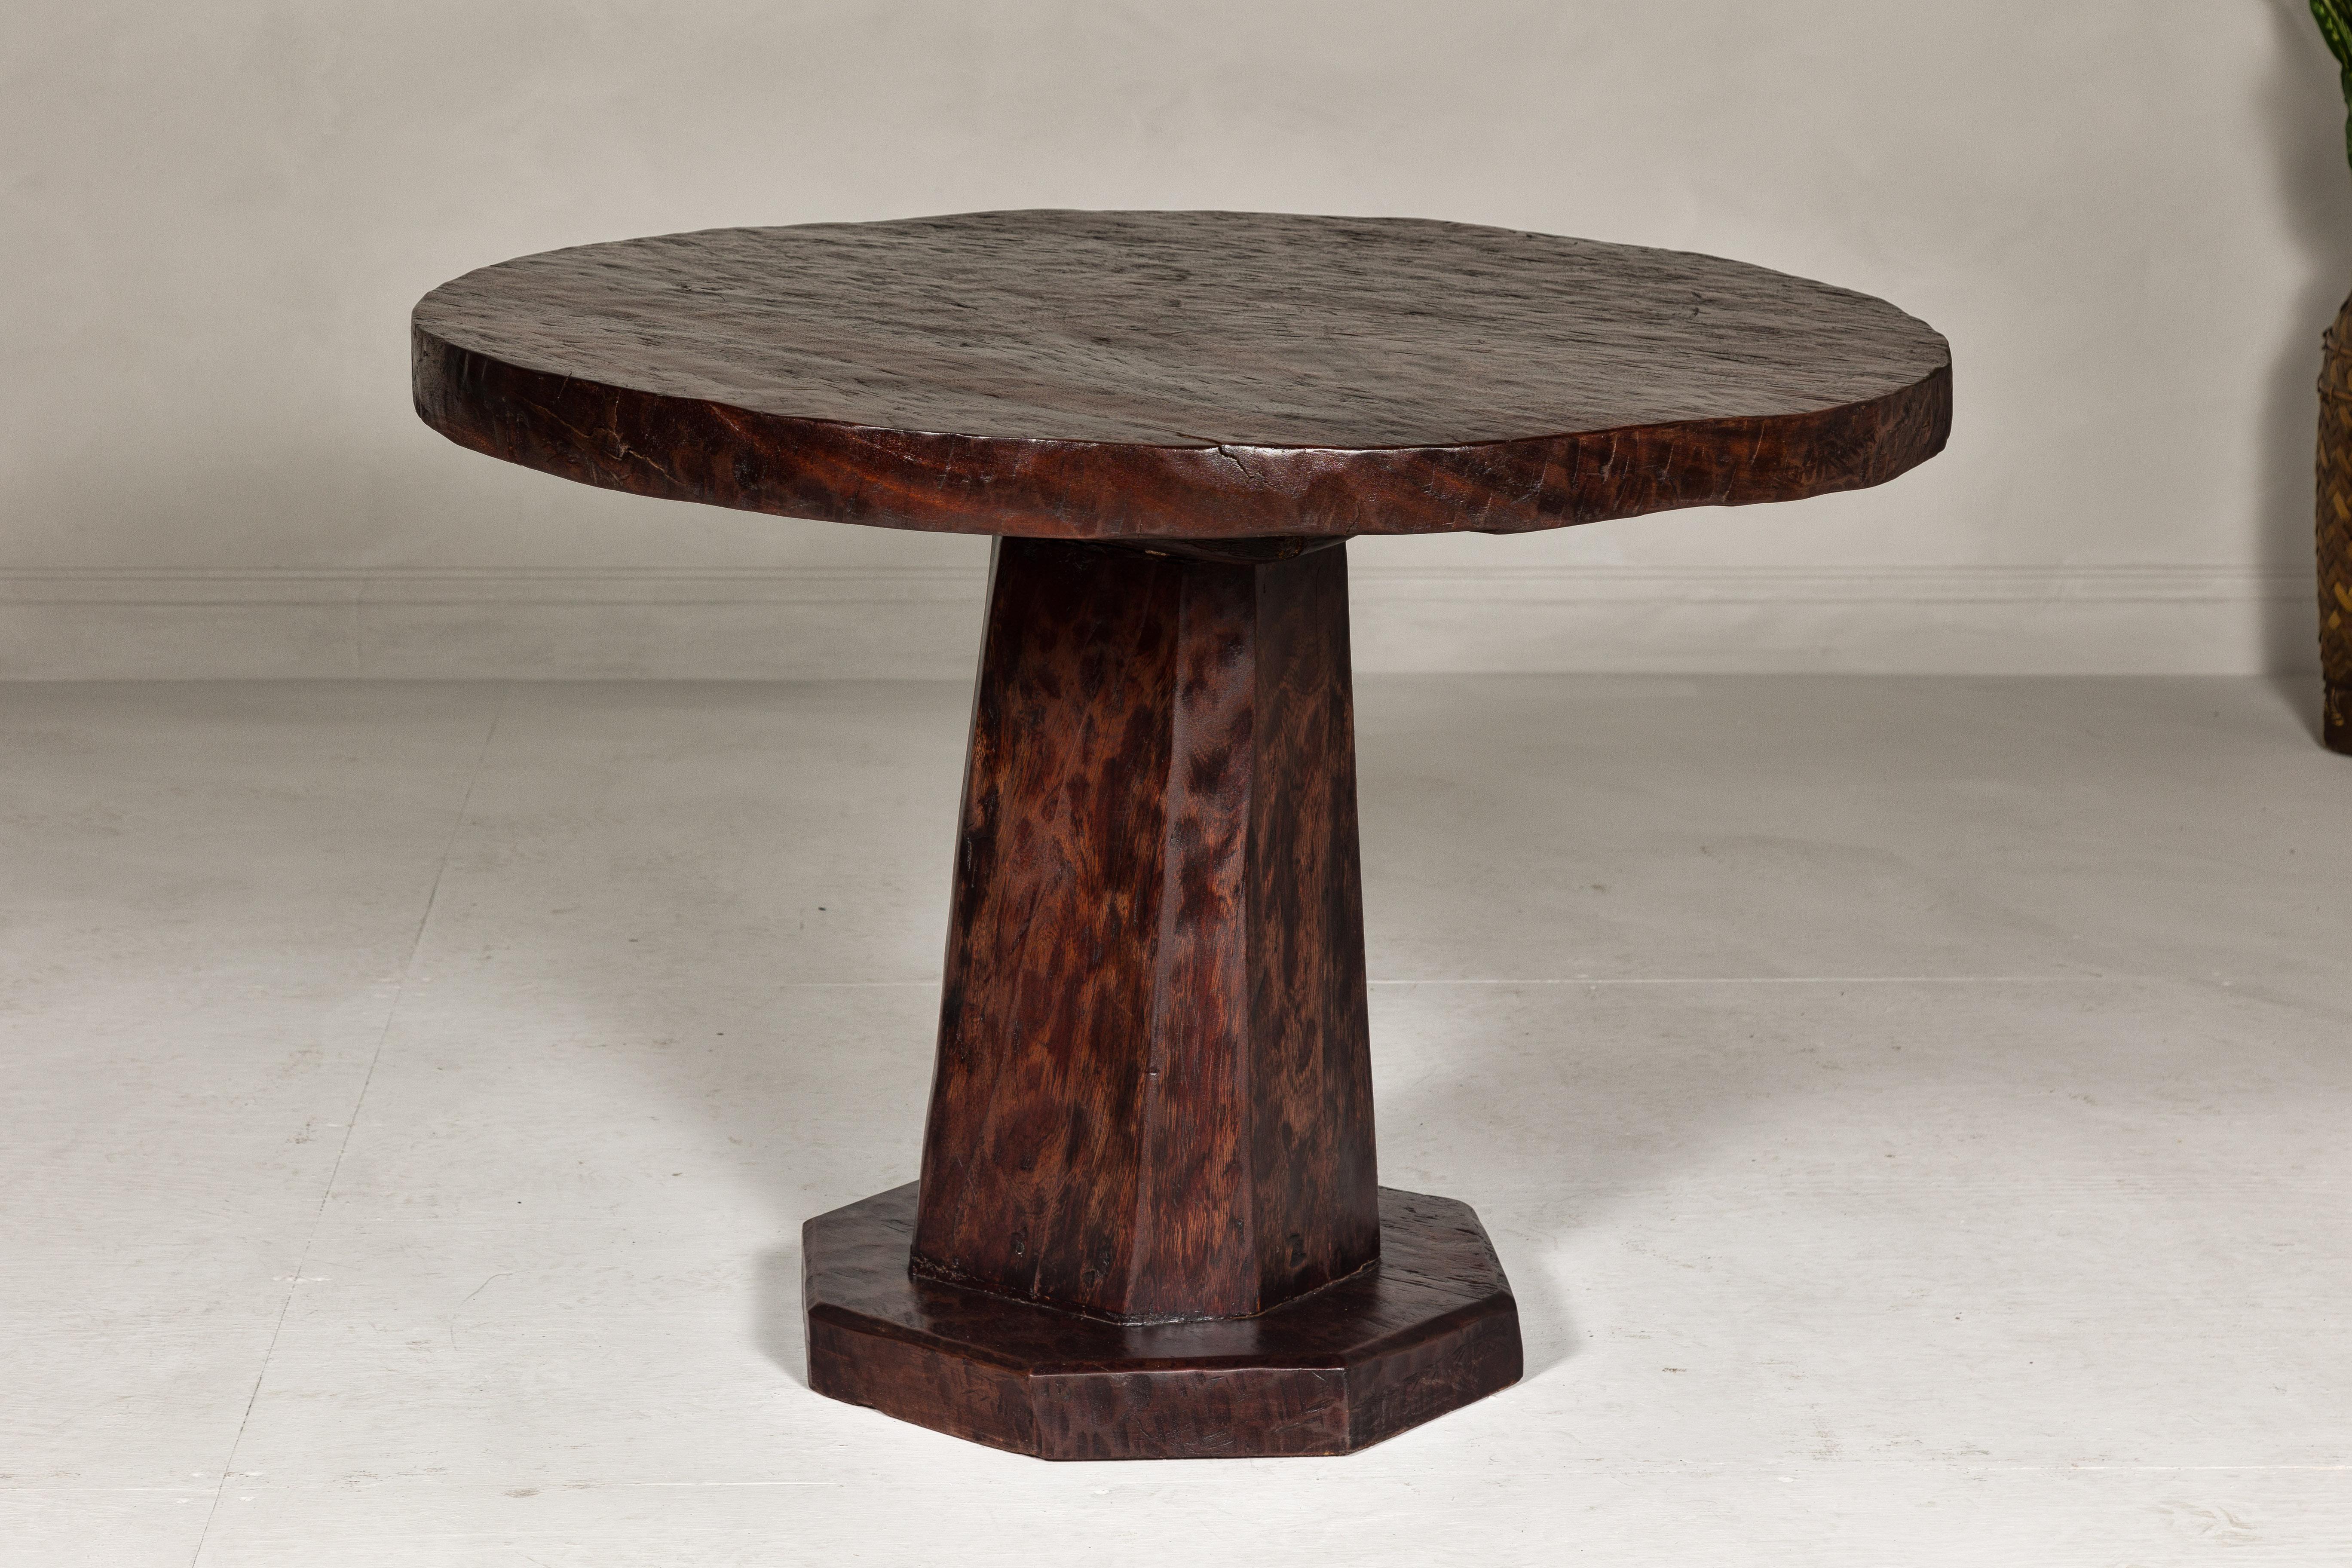 Carved Teak Wood Round Top Center Pedestal Table with Dark Stain, Vintage For Sale